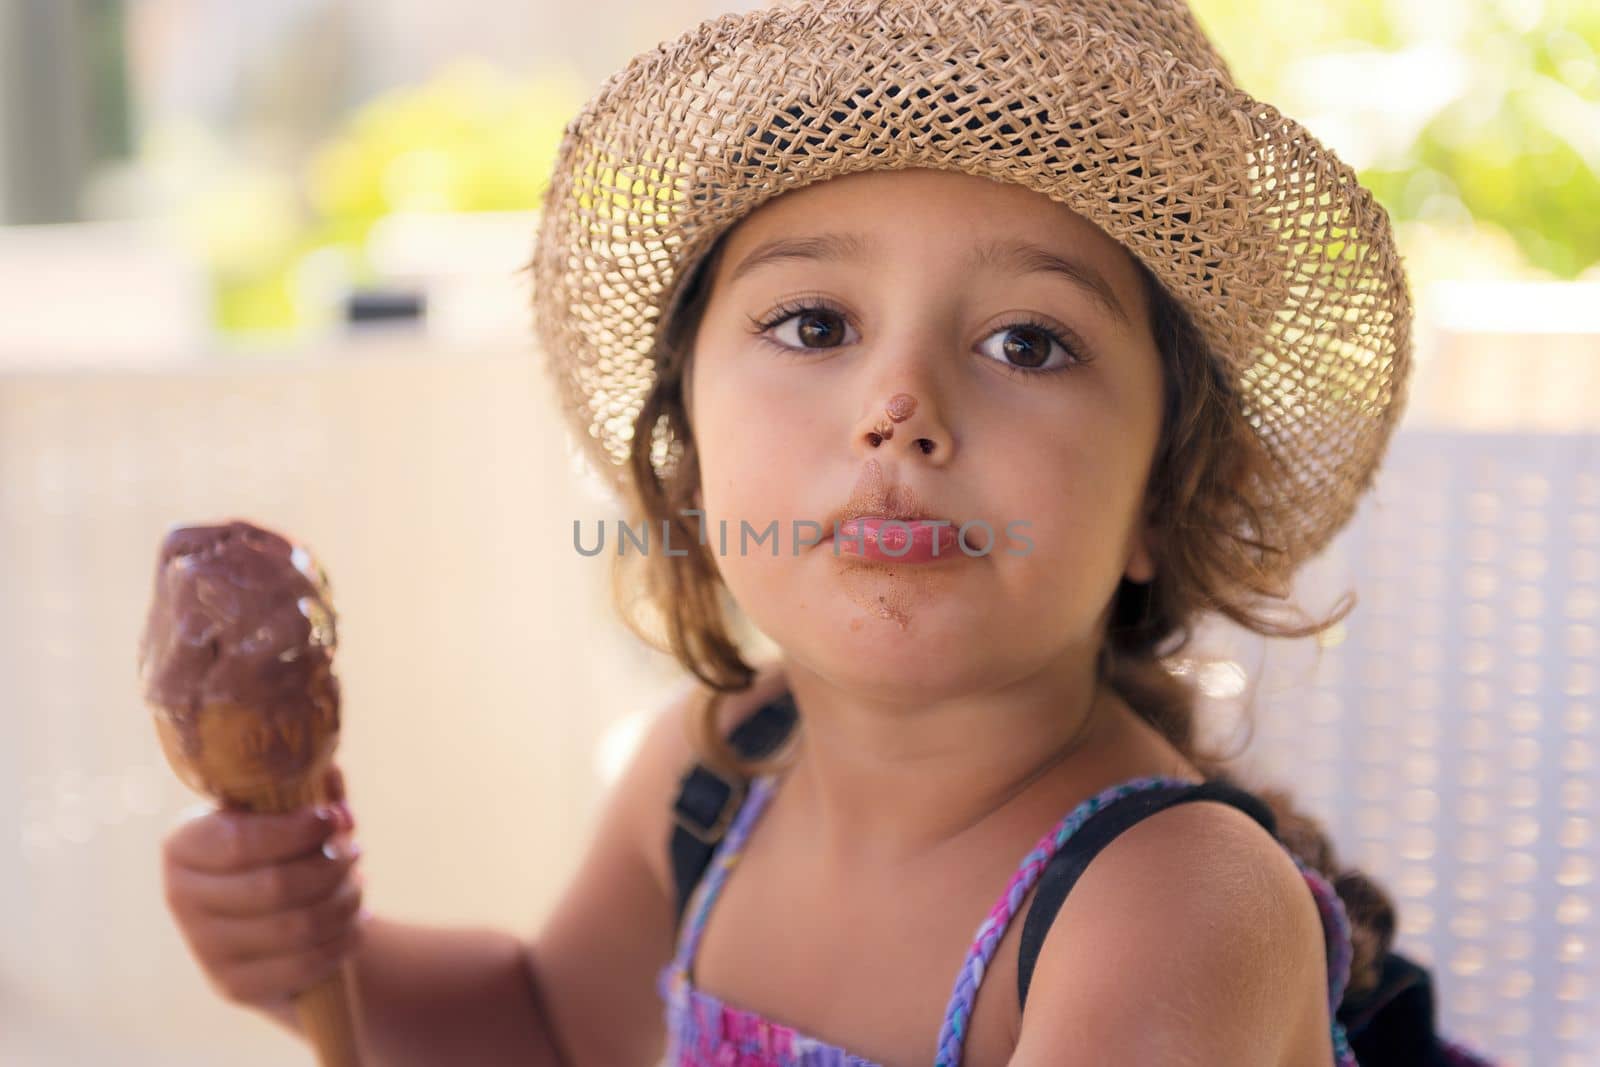 Little girl with straw hat and a sundress enjoys the summer heat eating a refreshing cone of chocolate ice cream, it melts on her hand and she has the nose stained with chocolate